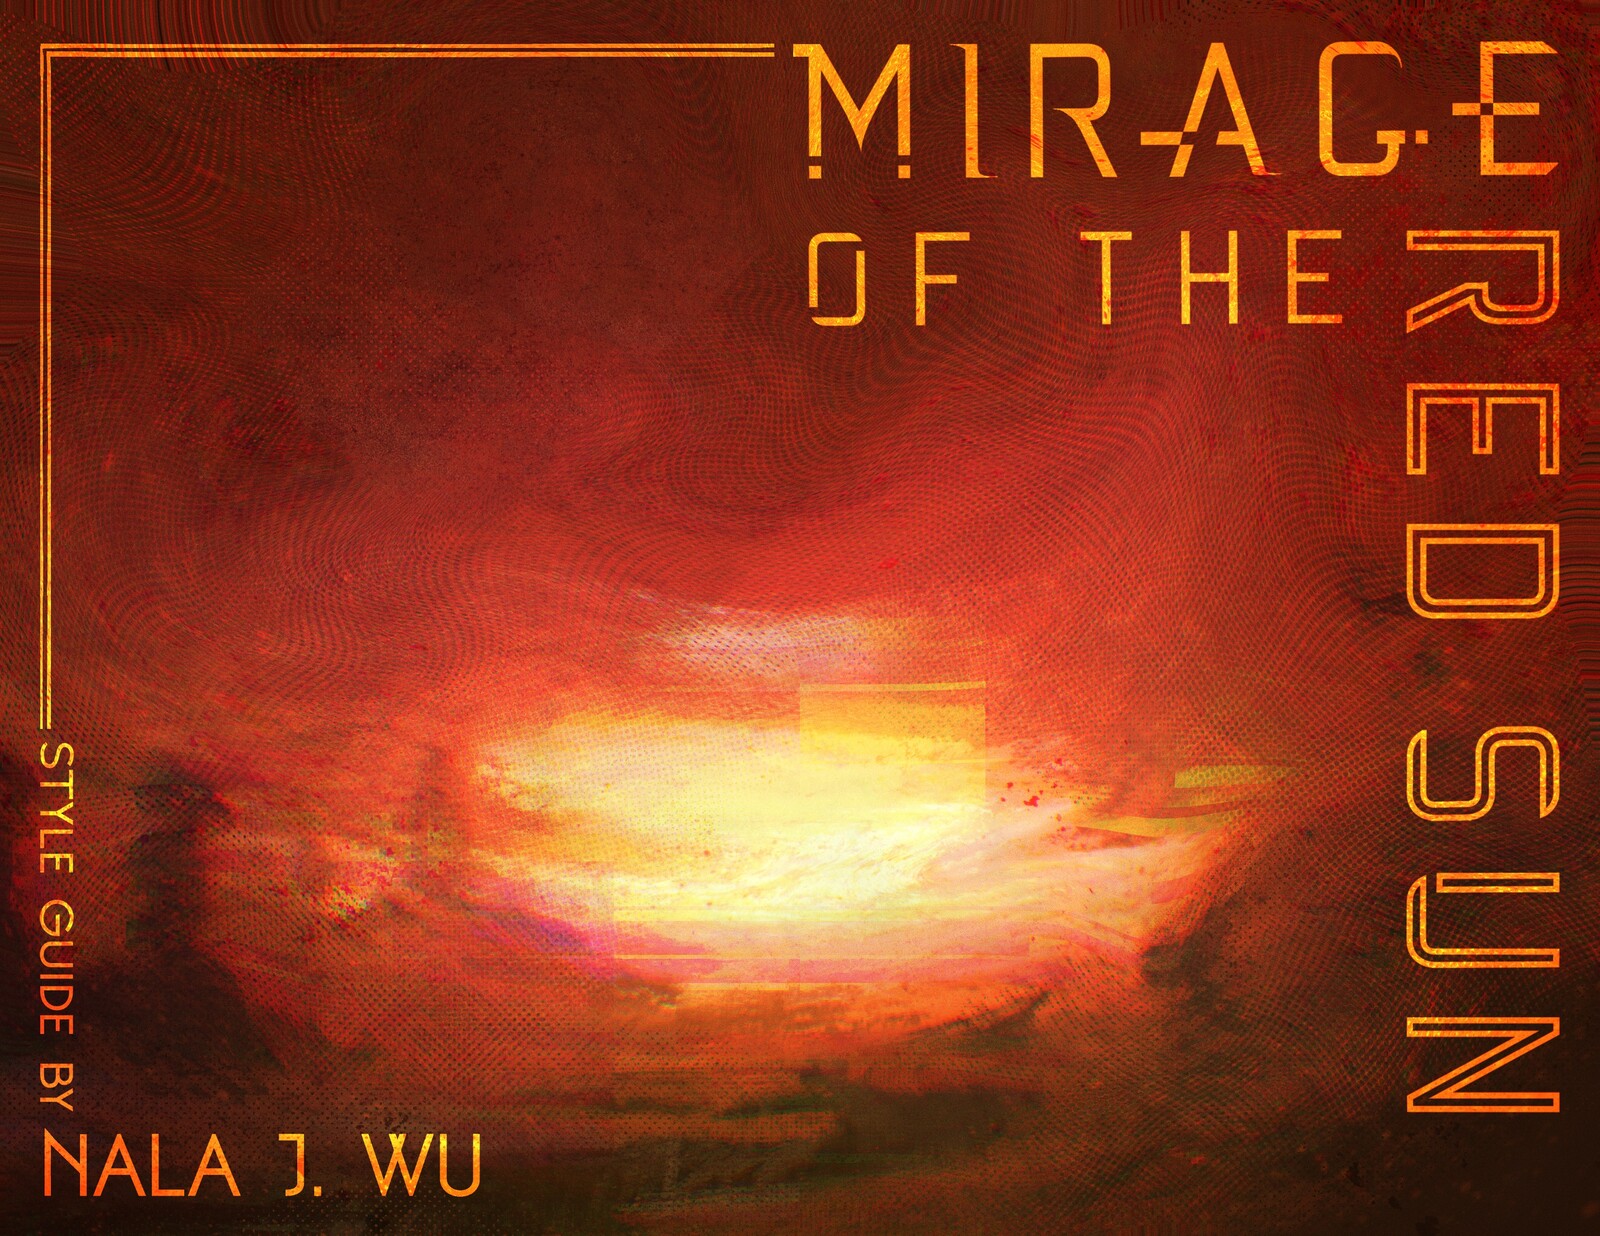 Title Design - Mirage of the Red Sun